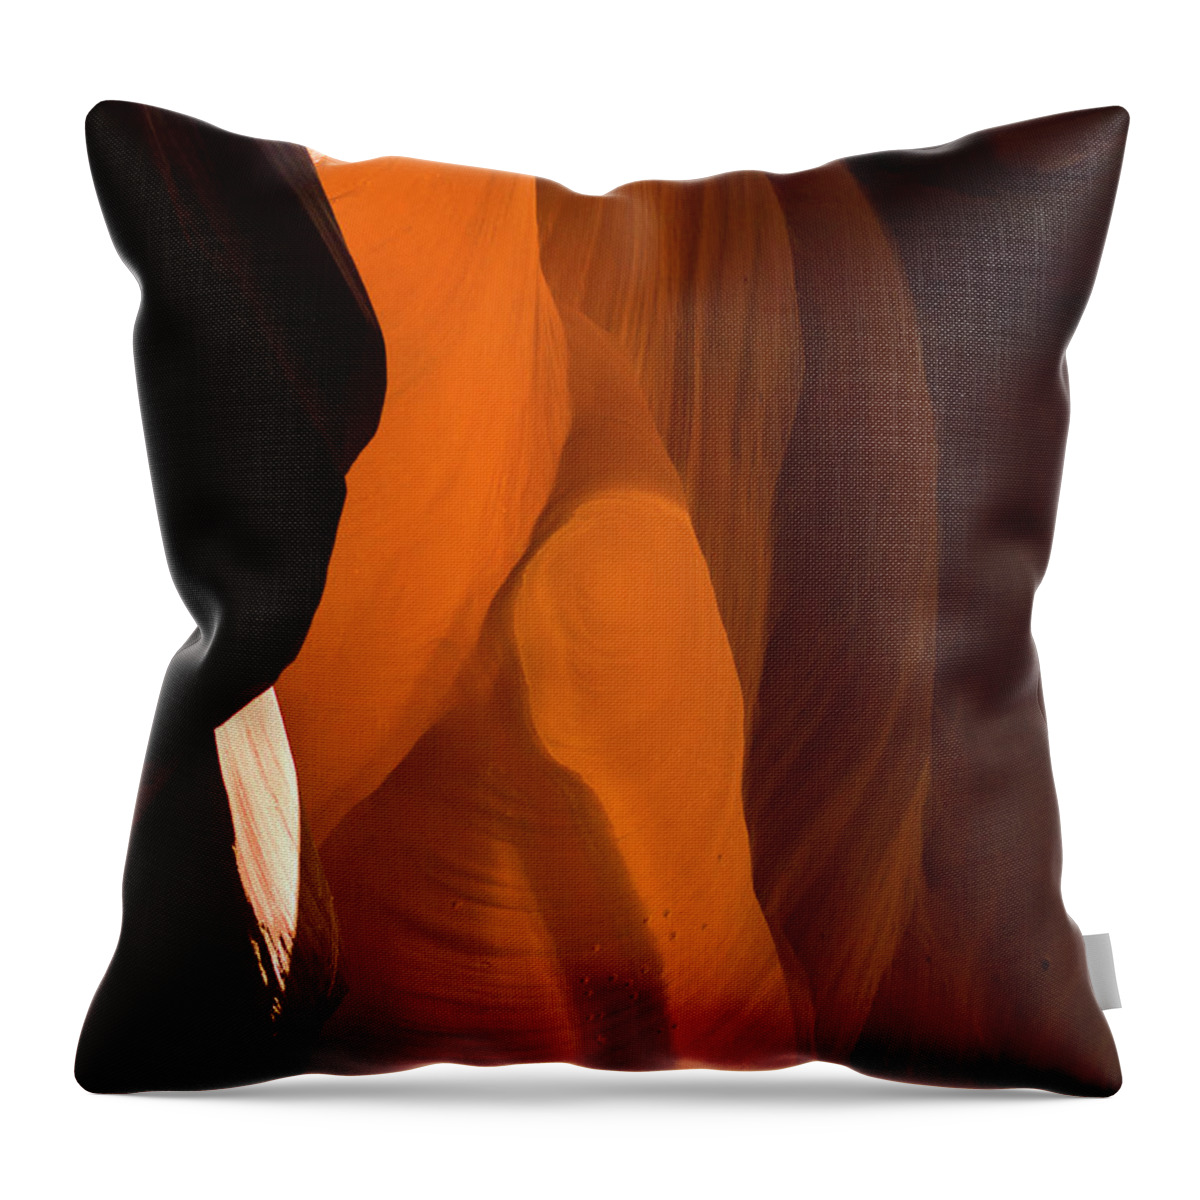 Antelope Canyon Throw Pillow featuring the photograph Sitting Woman by Davorlovincic